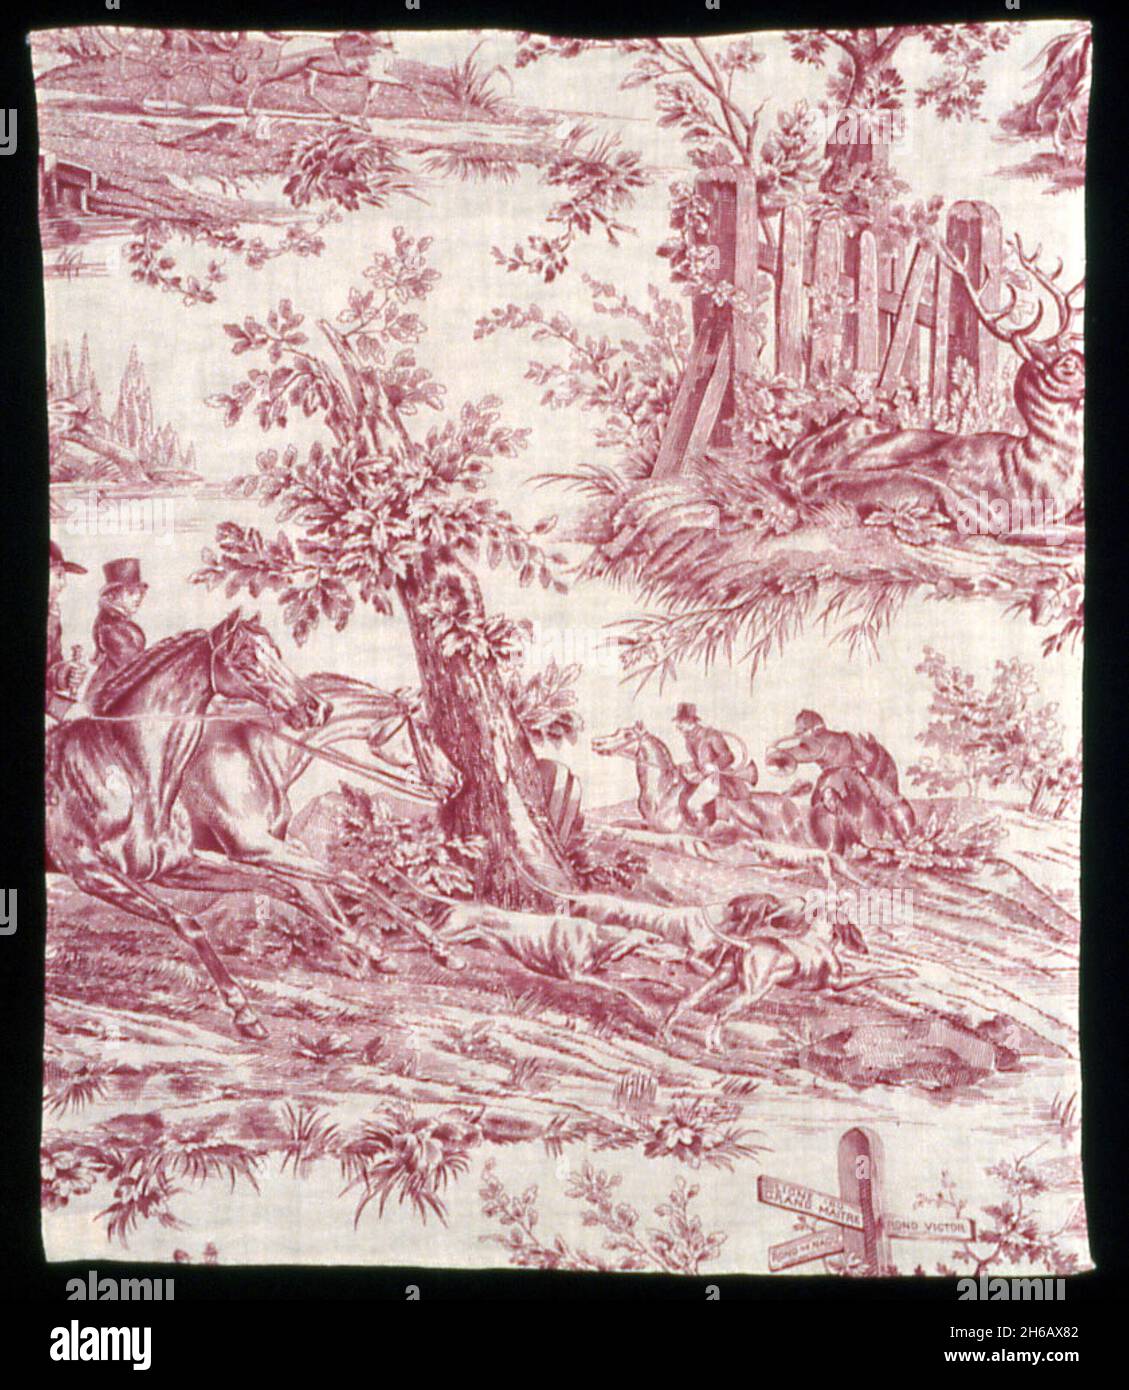 La Route de Jouy (The Road to Jouy) (Furnishing Fabric), France, 1825/35. Designed by Horace Vernet and Carle Vernet, manufactured by Oberkampf Manufactory. Stock Photo